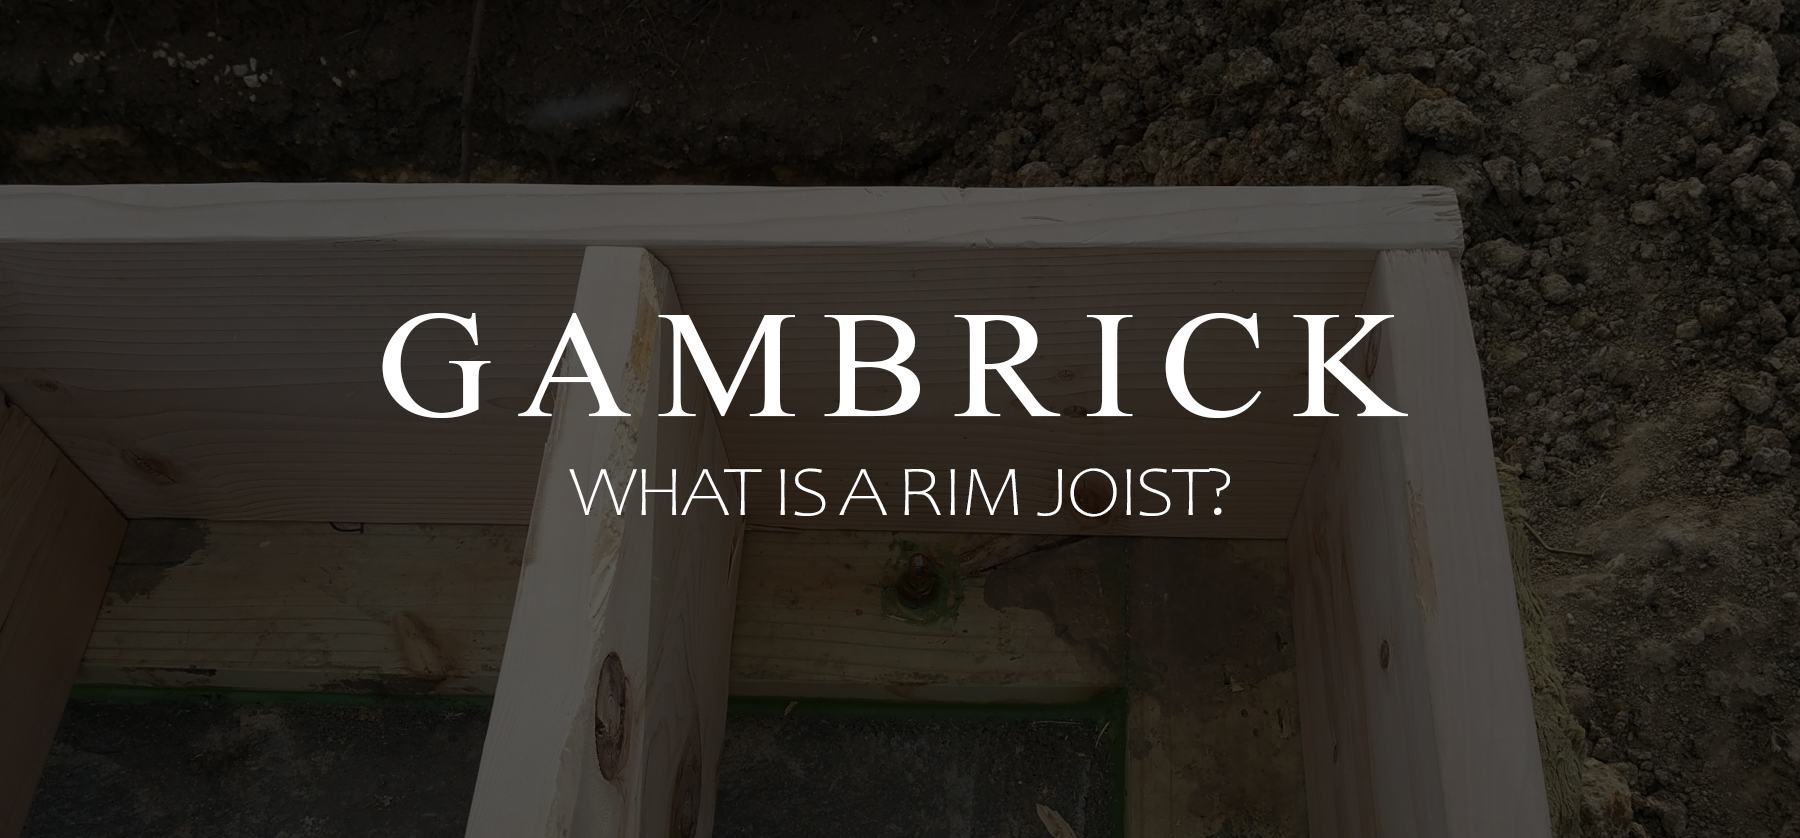 what is a rim joist banner pic